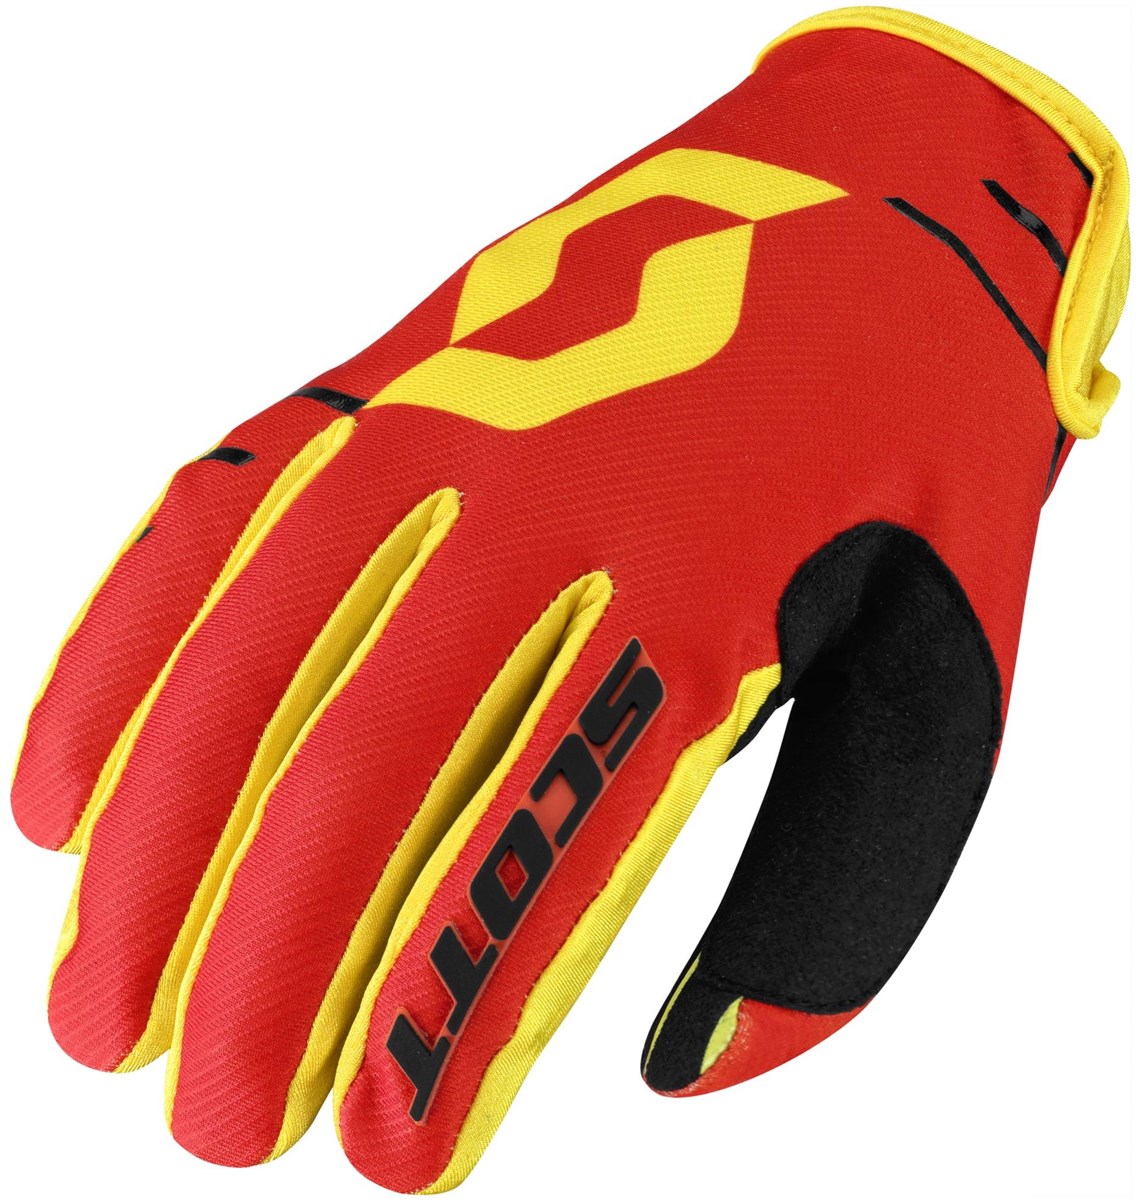 Scott 350 Dirt Long Finger Cycling Gloves product image